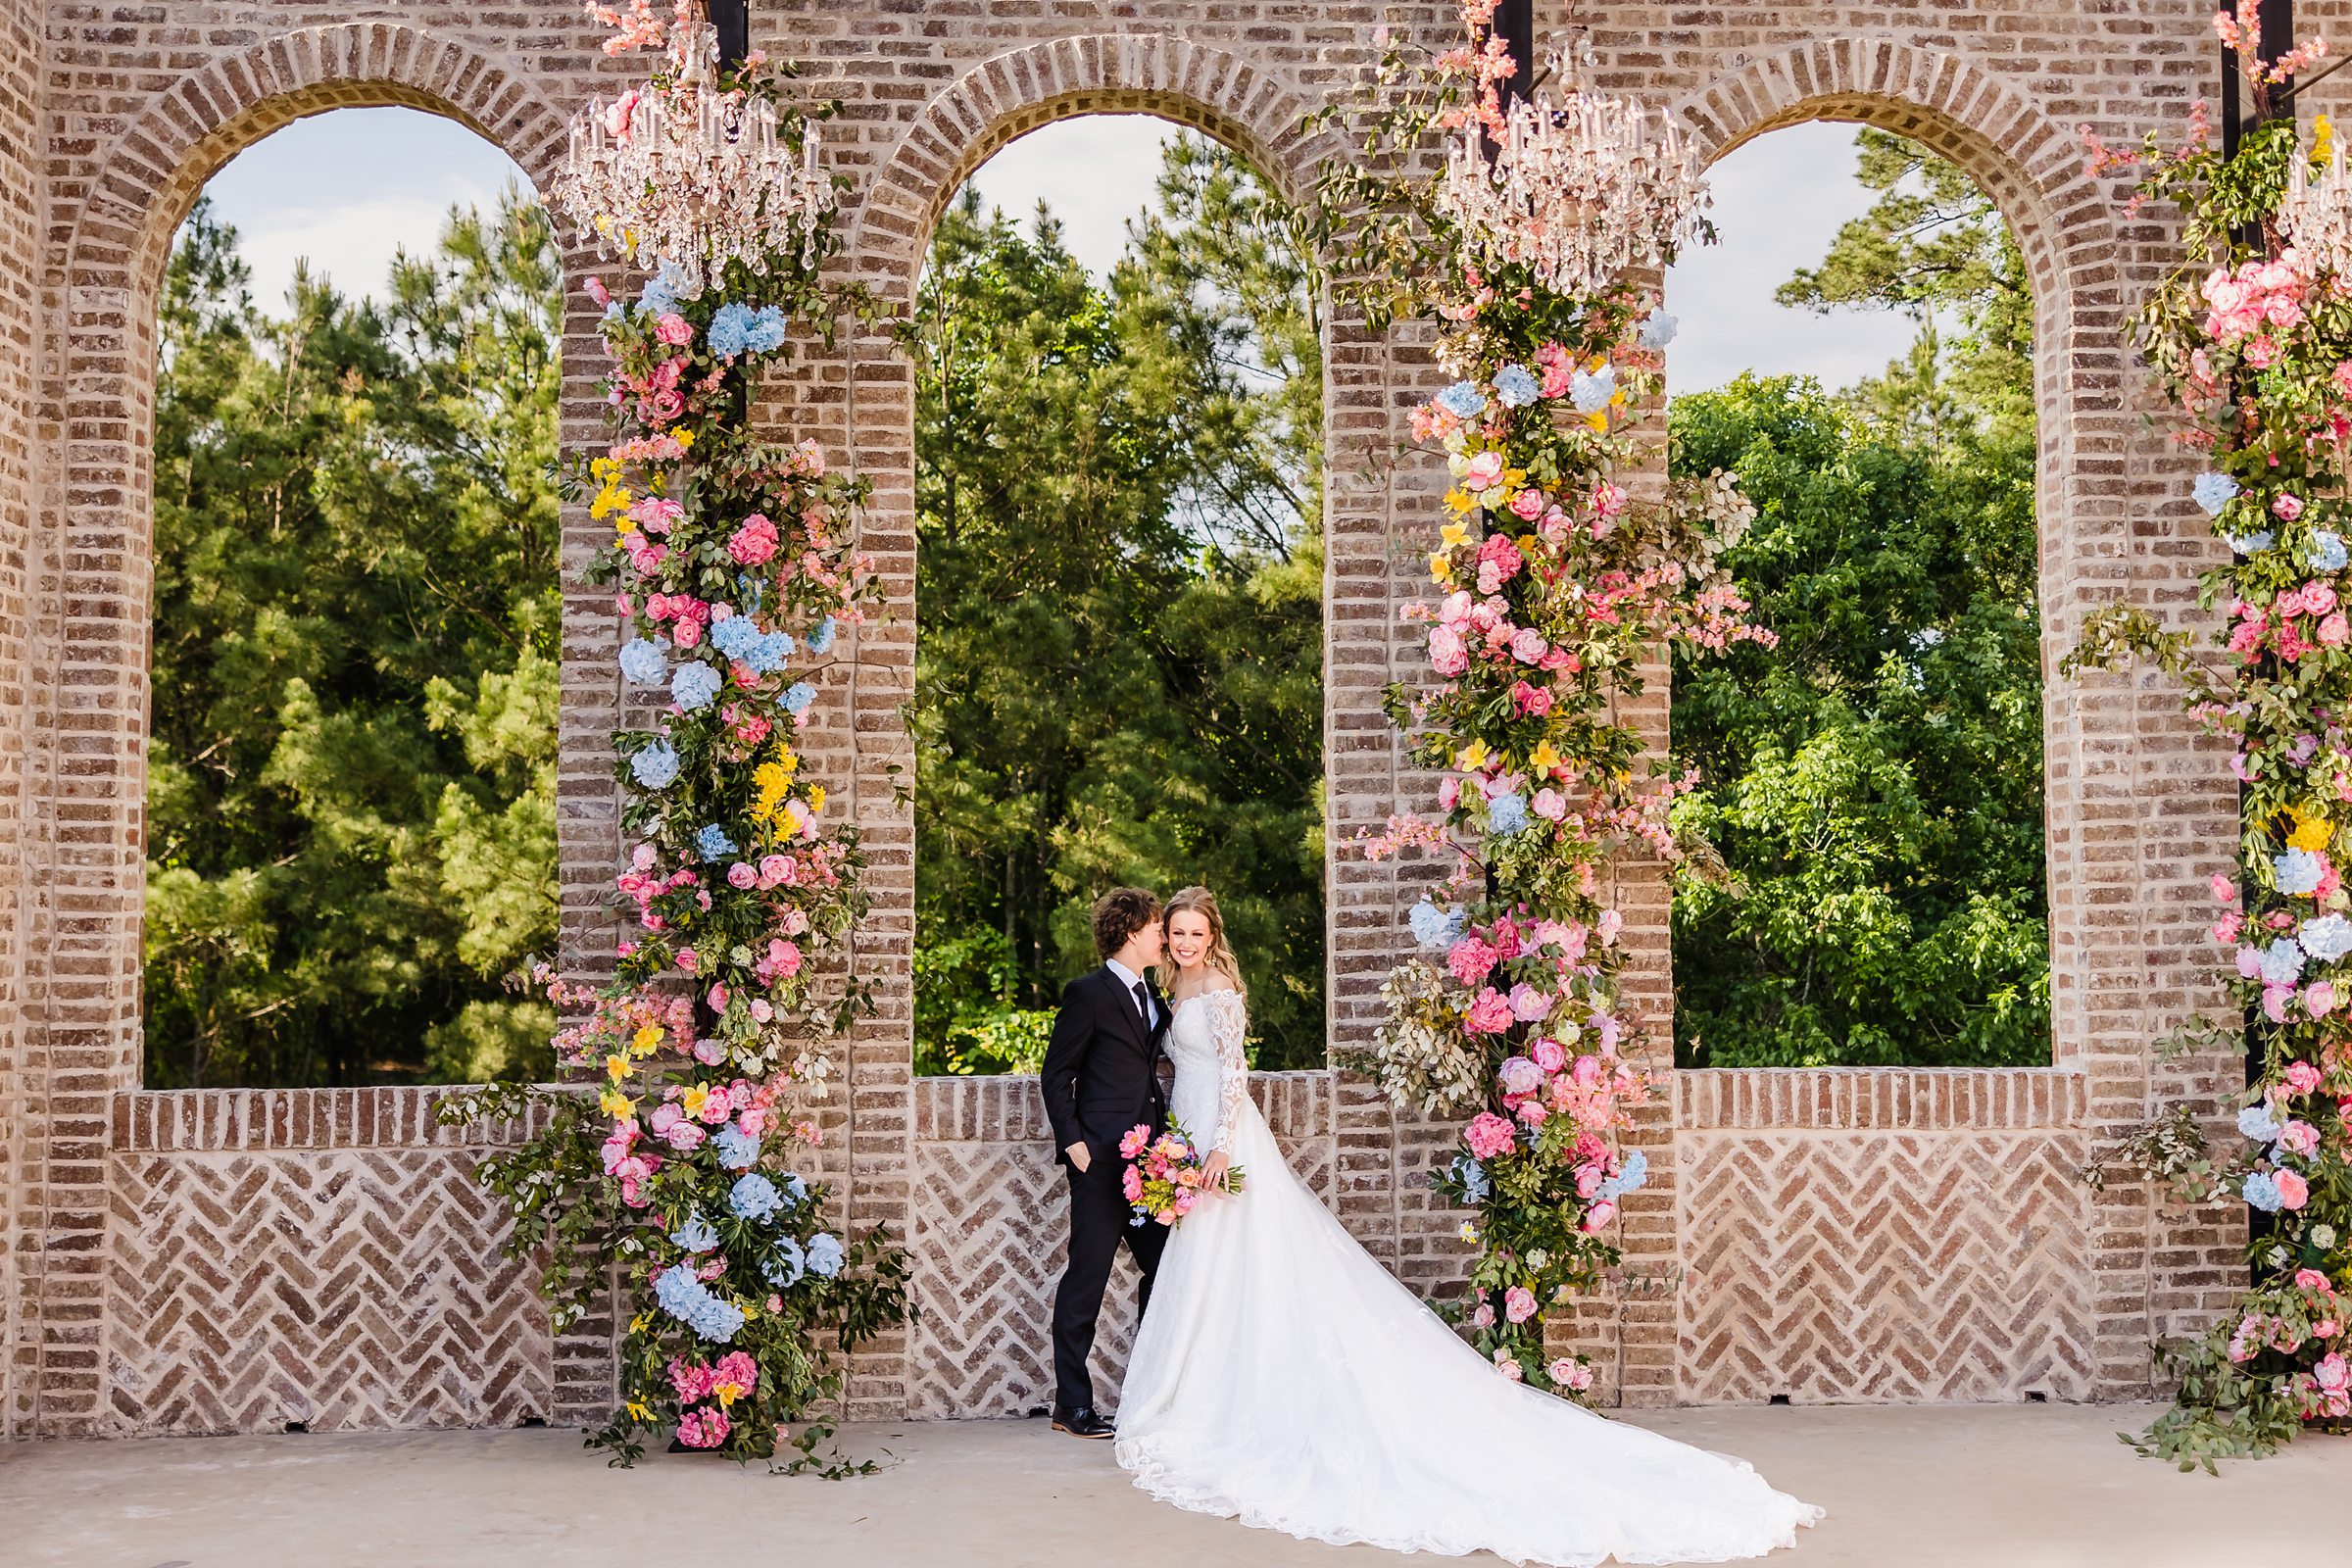 Bride and Groom celebrate their wedding at the Iron Manor in Montgomery, Texas.